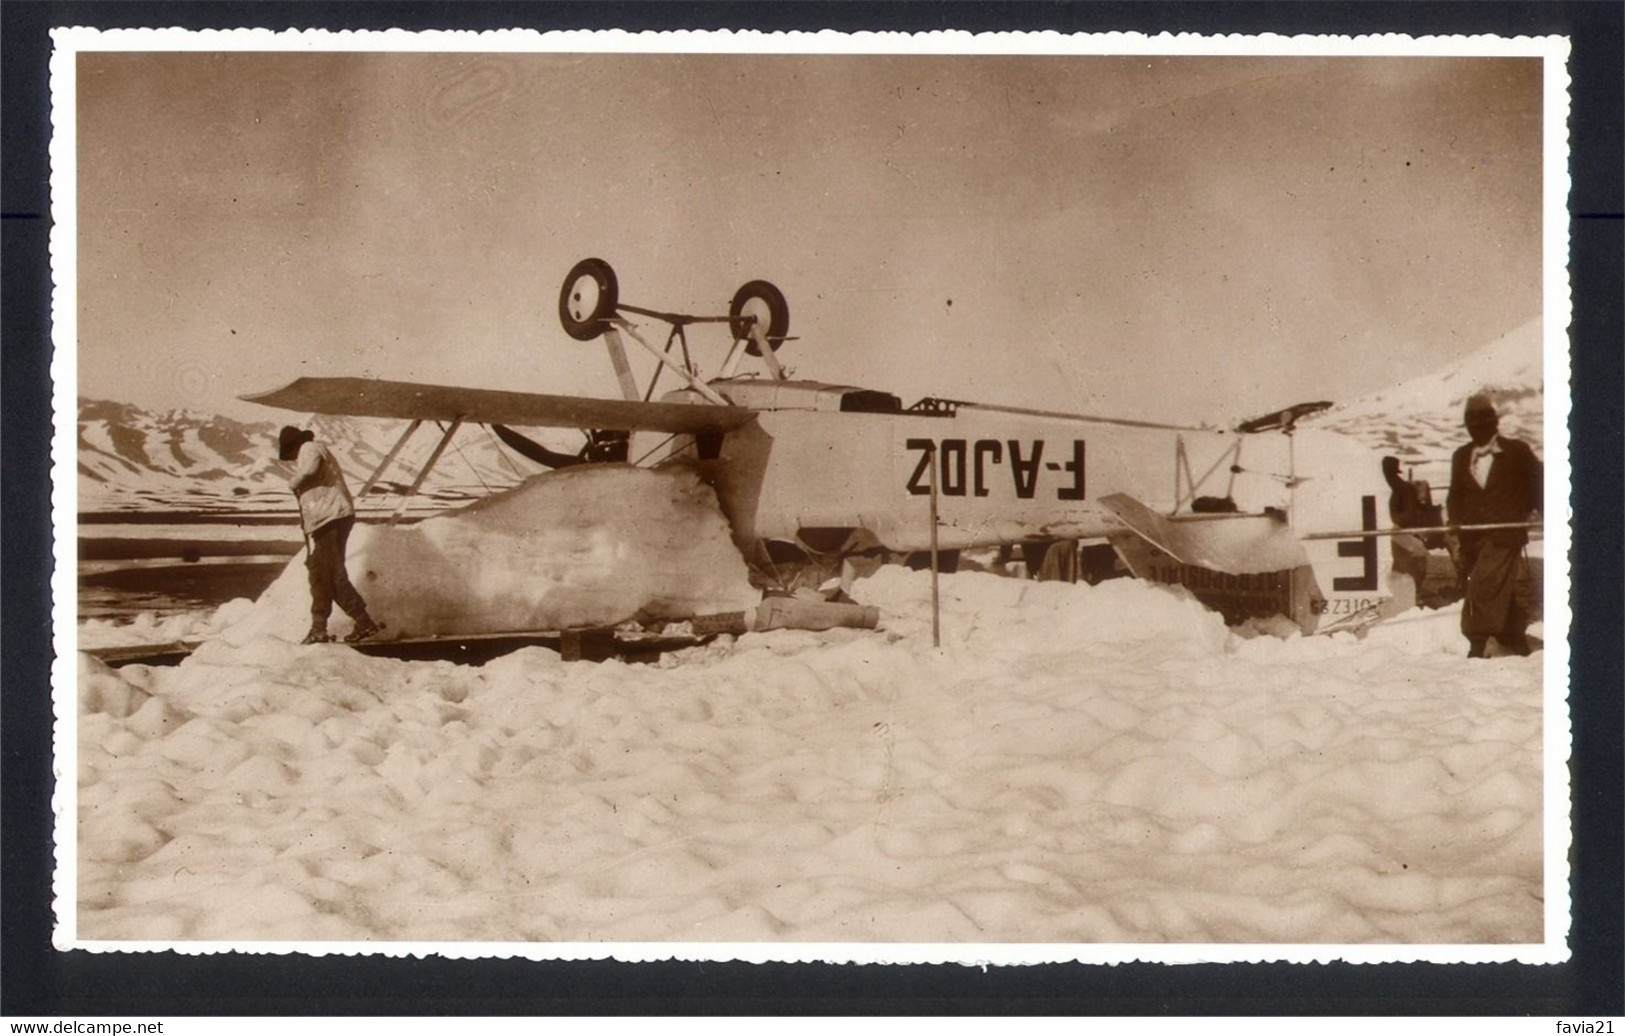 PHOTO AVIATION - LATECOERE - AEROPOSTALE - Accident Guillaumet / Andes - POTEZ 25 - Aviation